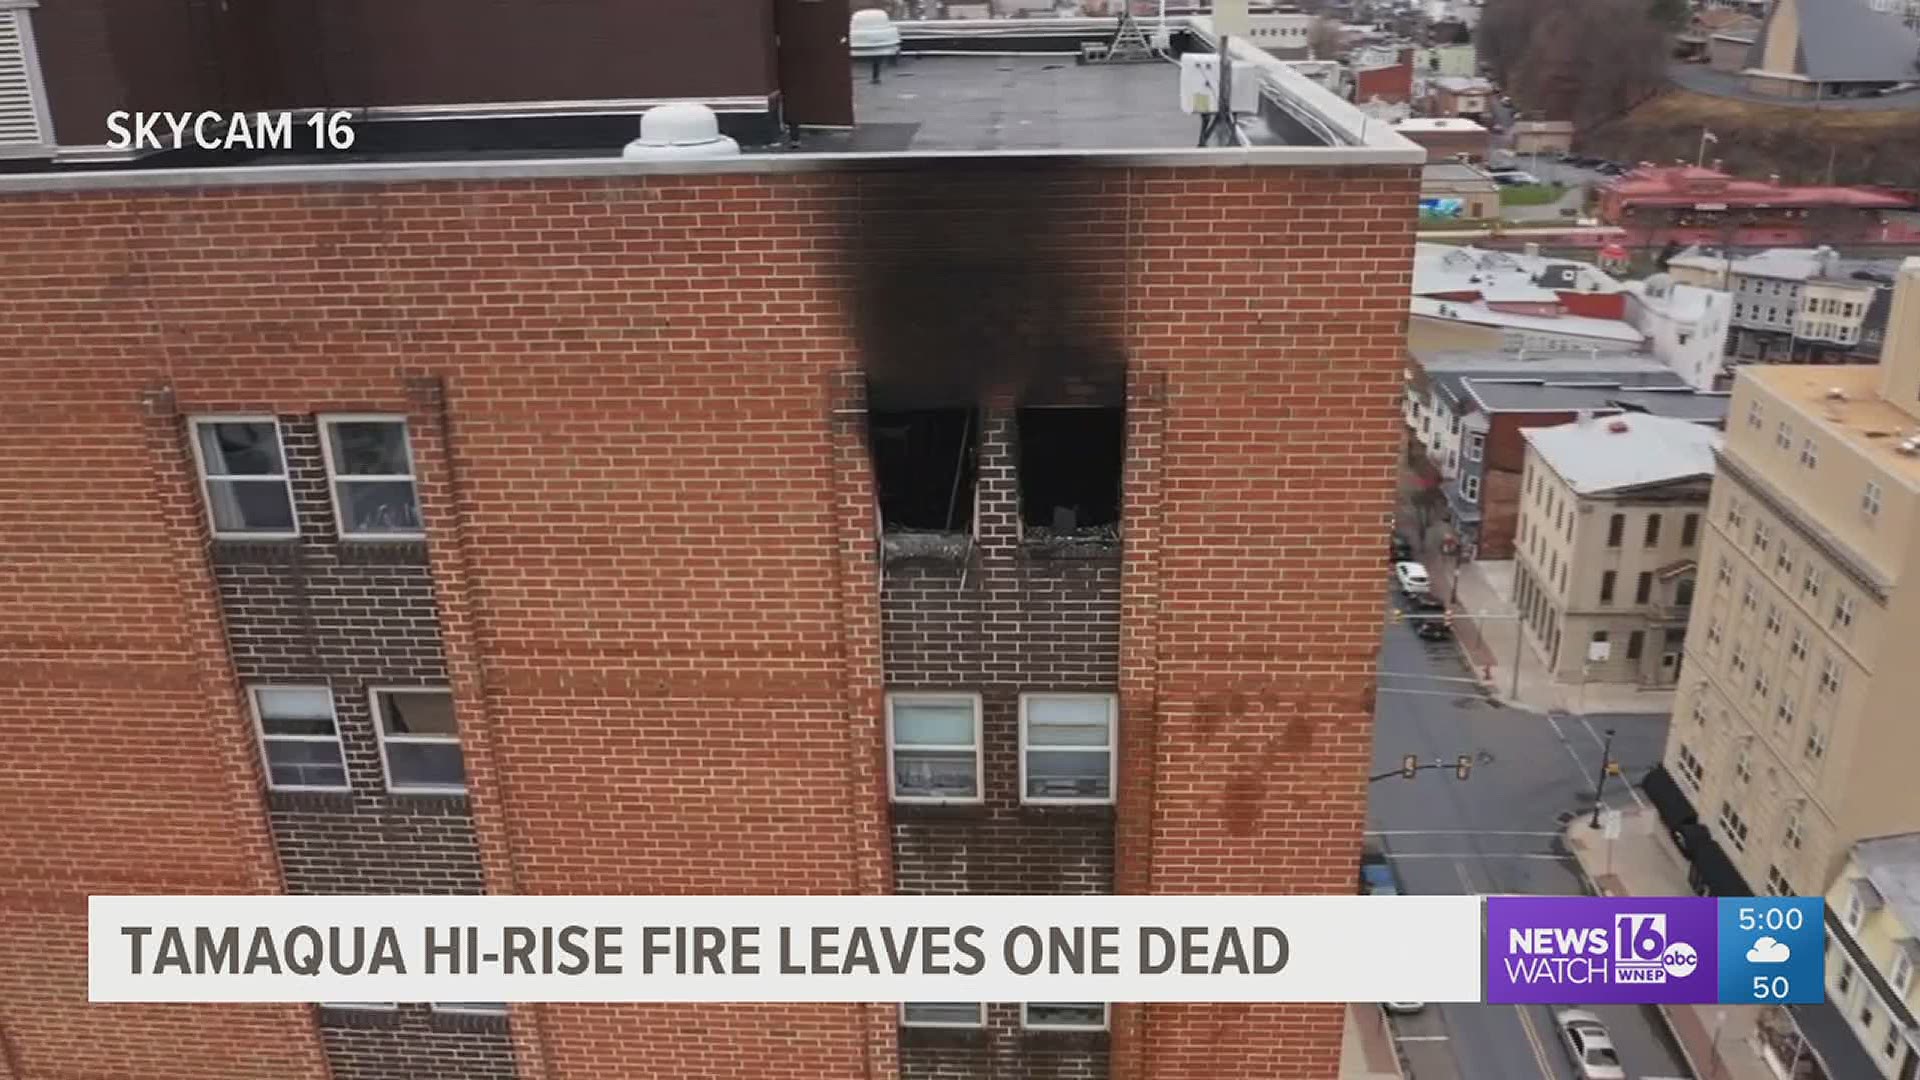 One person died after the fire early Friday morning.